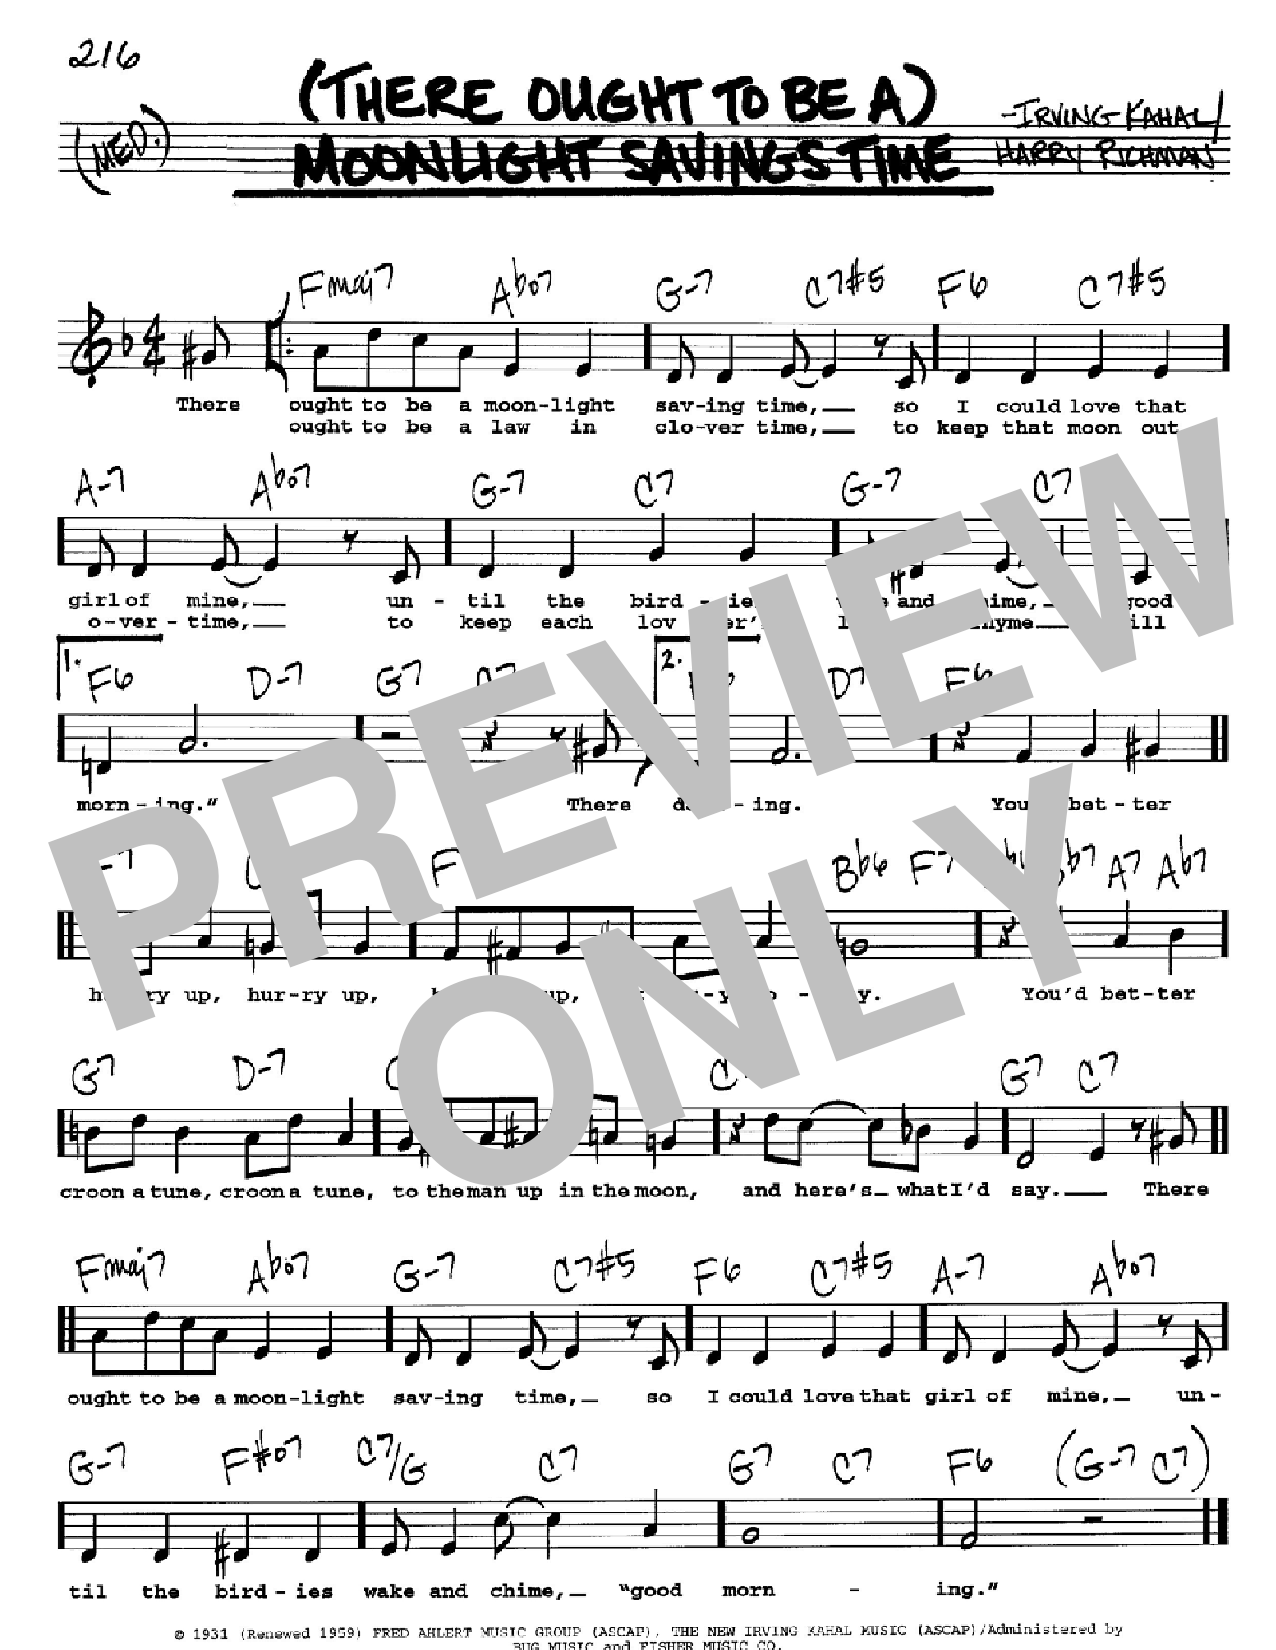 Download Irving Kahal (There Ought To Be A) Moonlight Savings Sheet Music